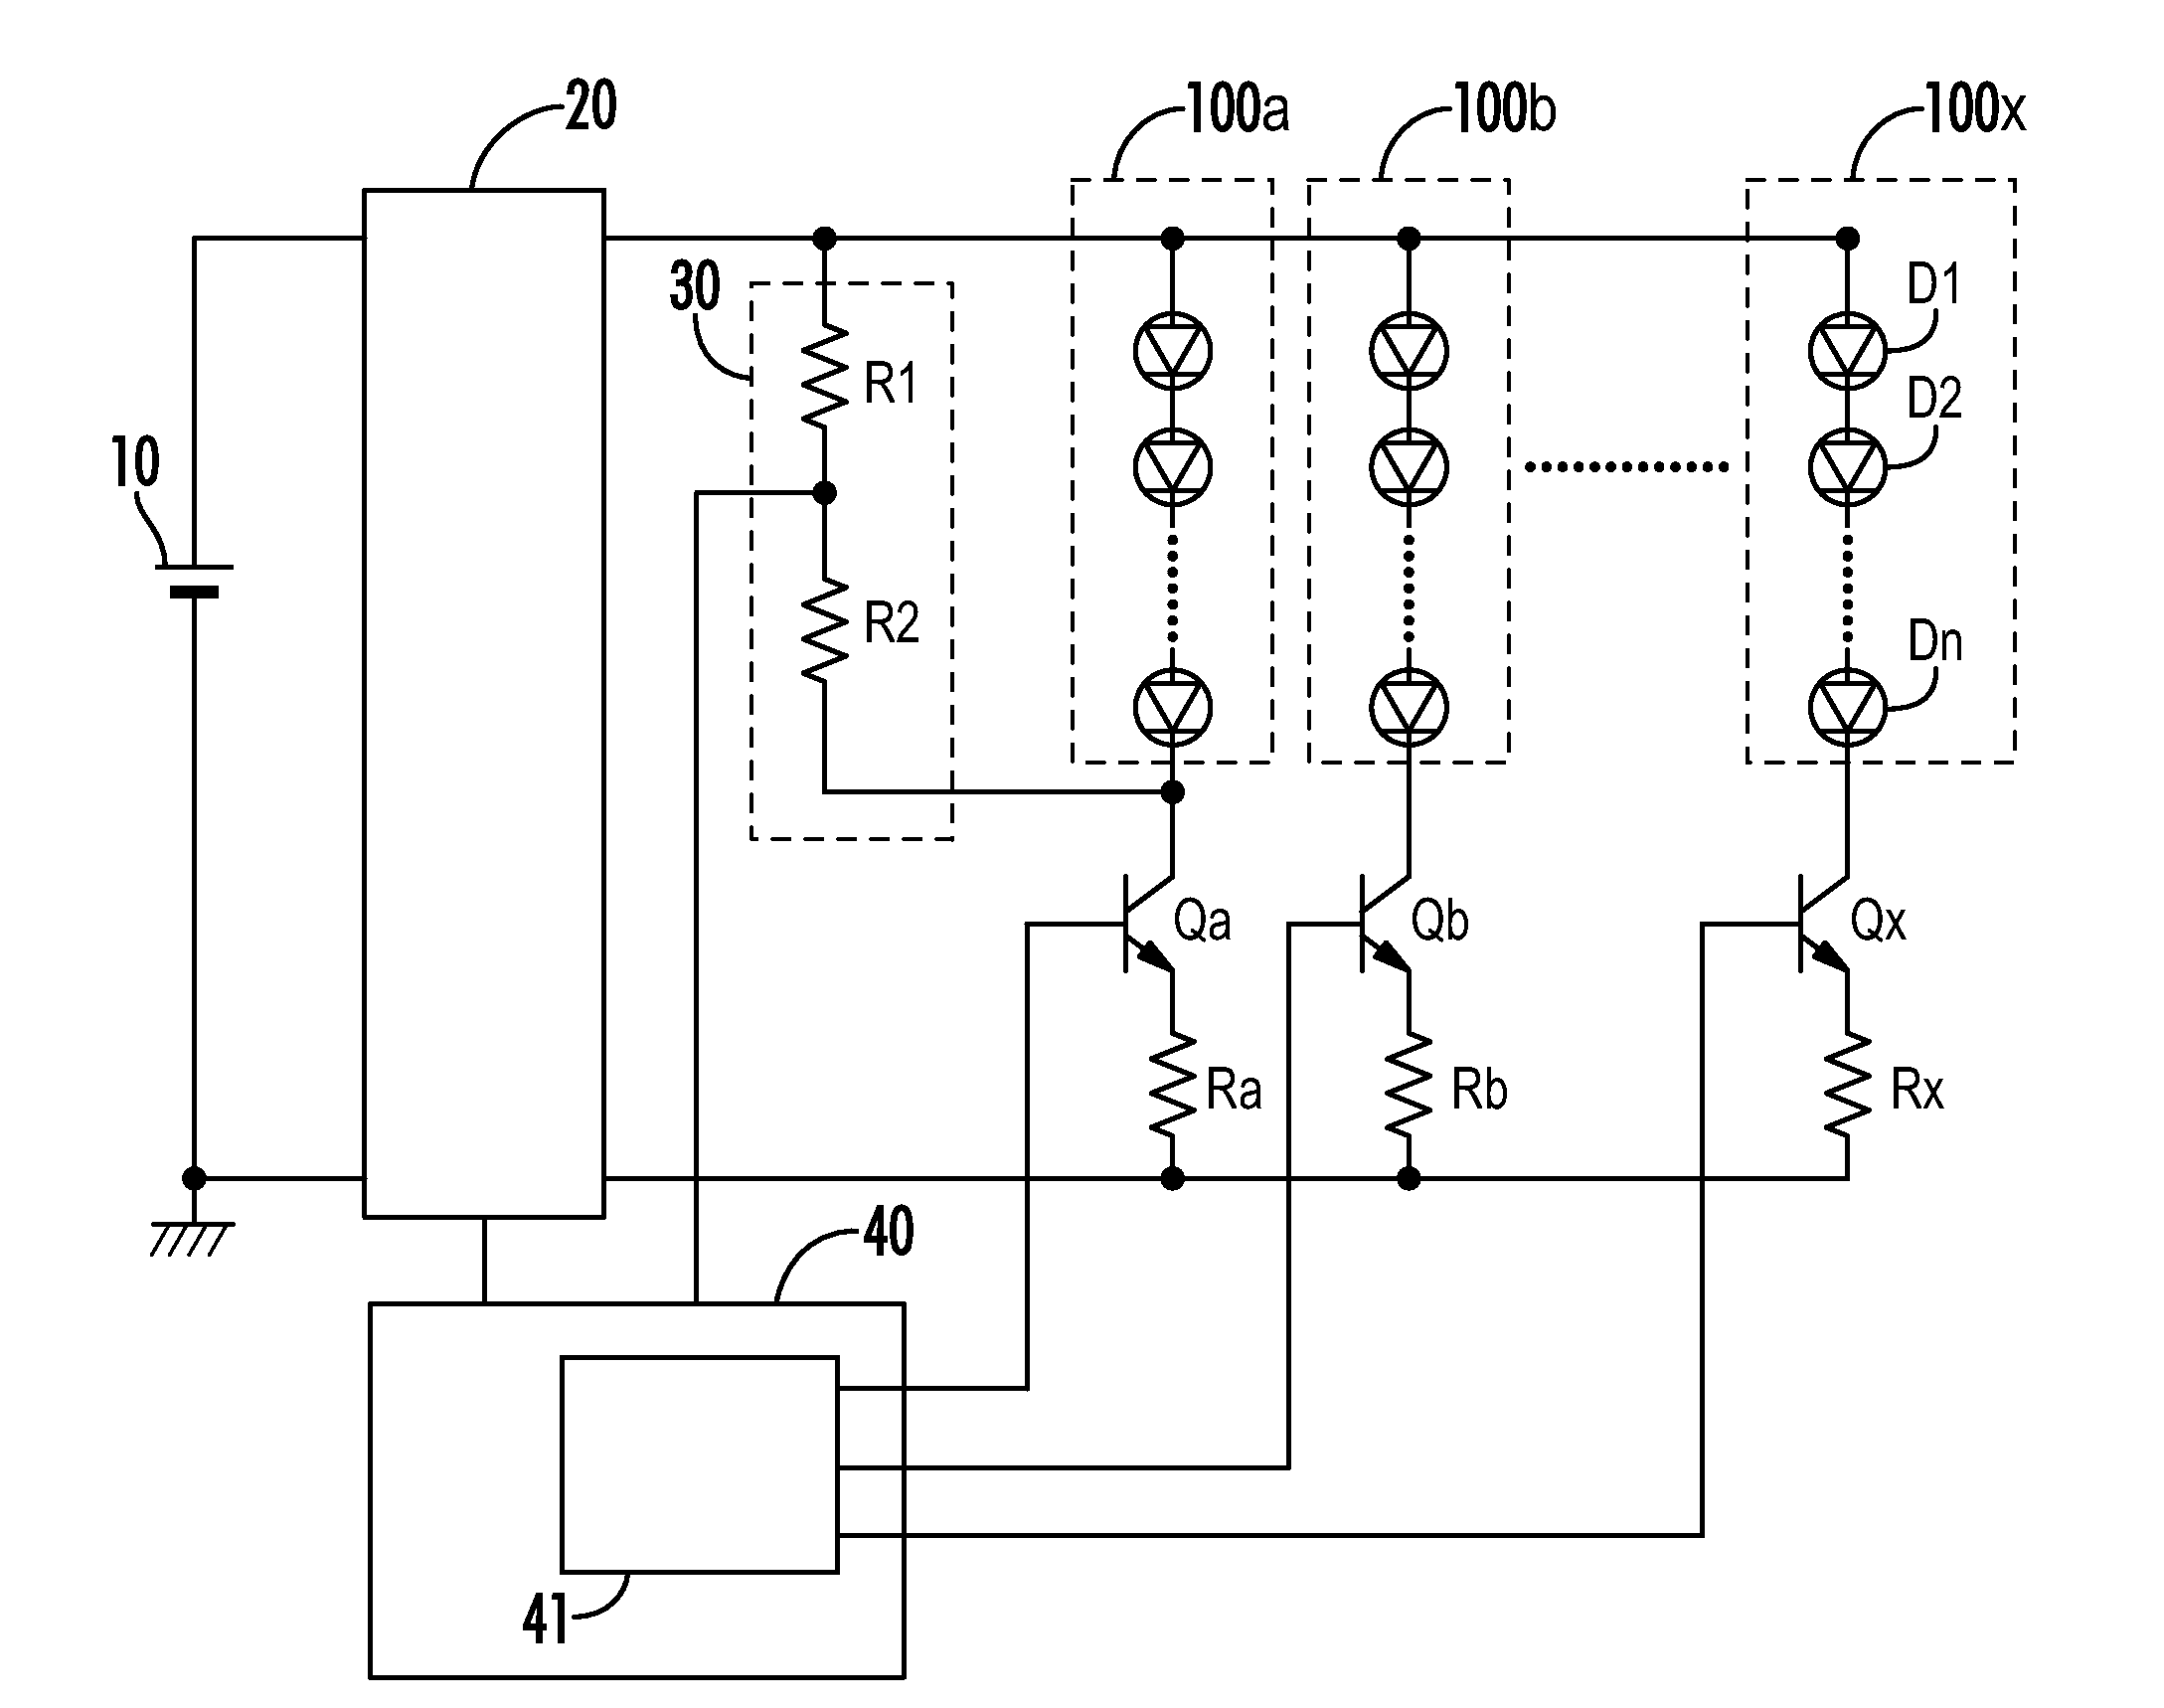 LED driver circuit with sequential LED lighting control